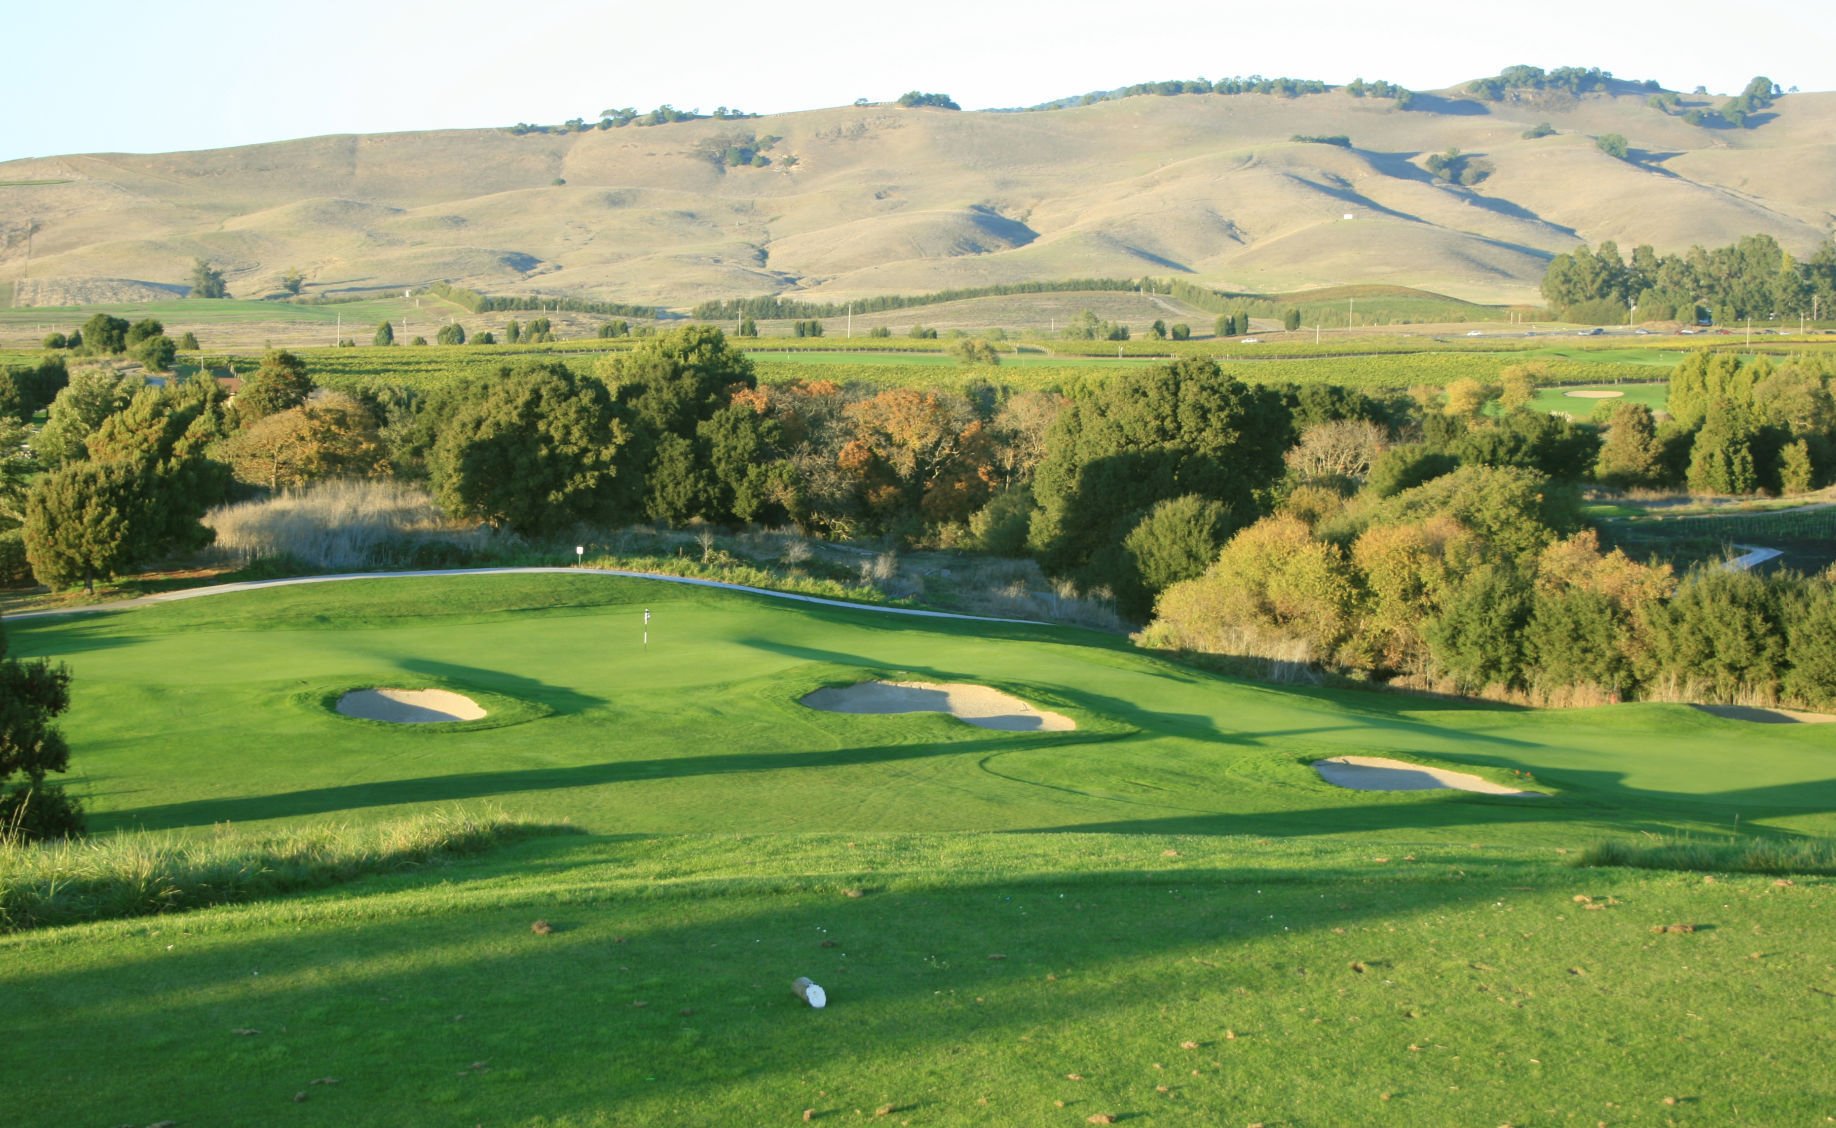 Napa Valley Golf Report Local qualifier for Drive, Chip and Putt at Chardonnay